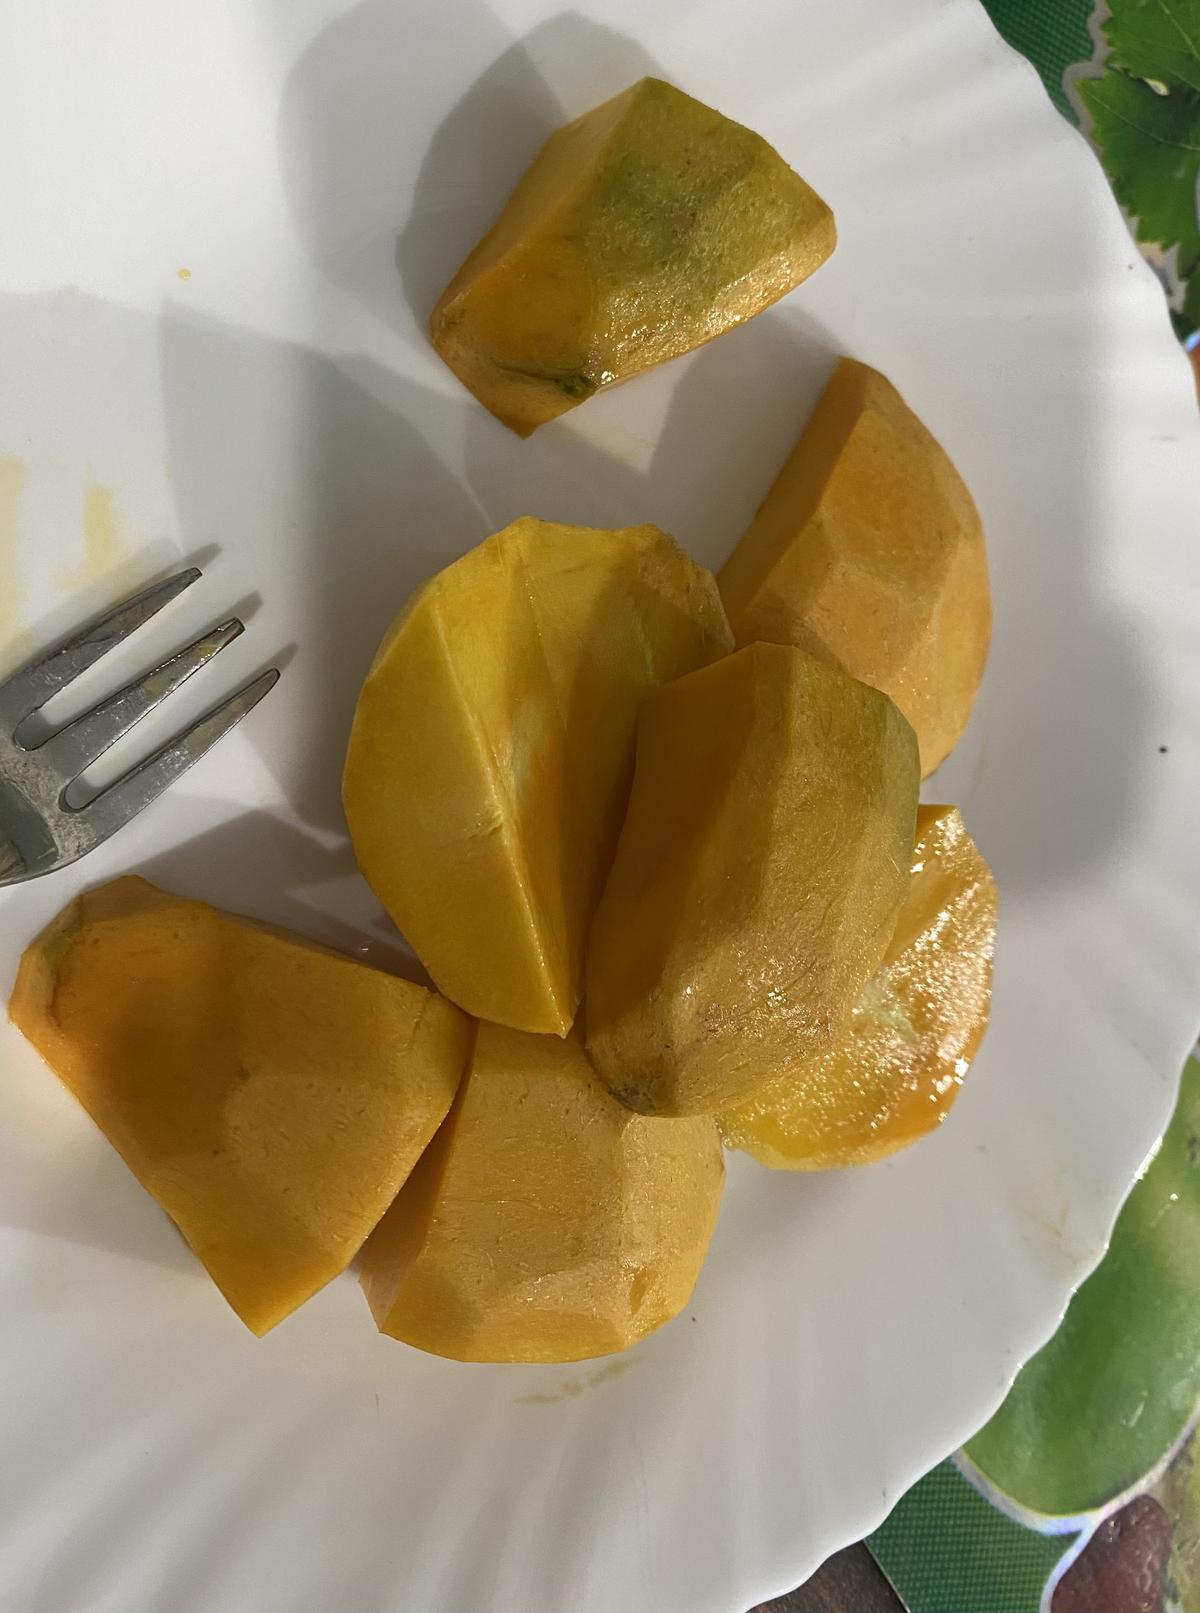 Golden yellow, sweet and delicious Patricia mangoes 